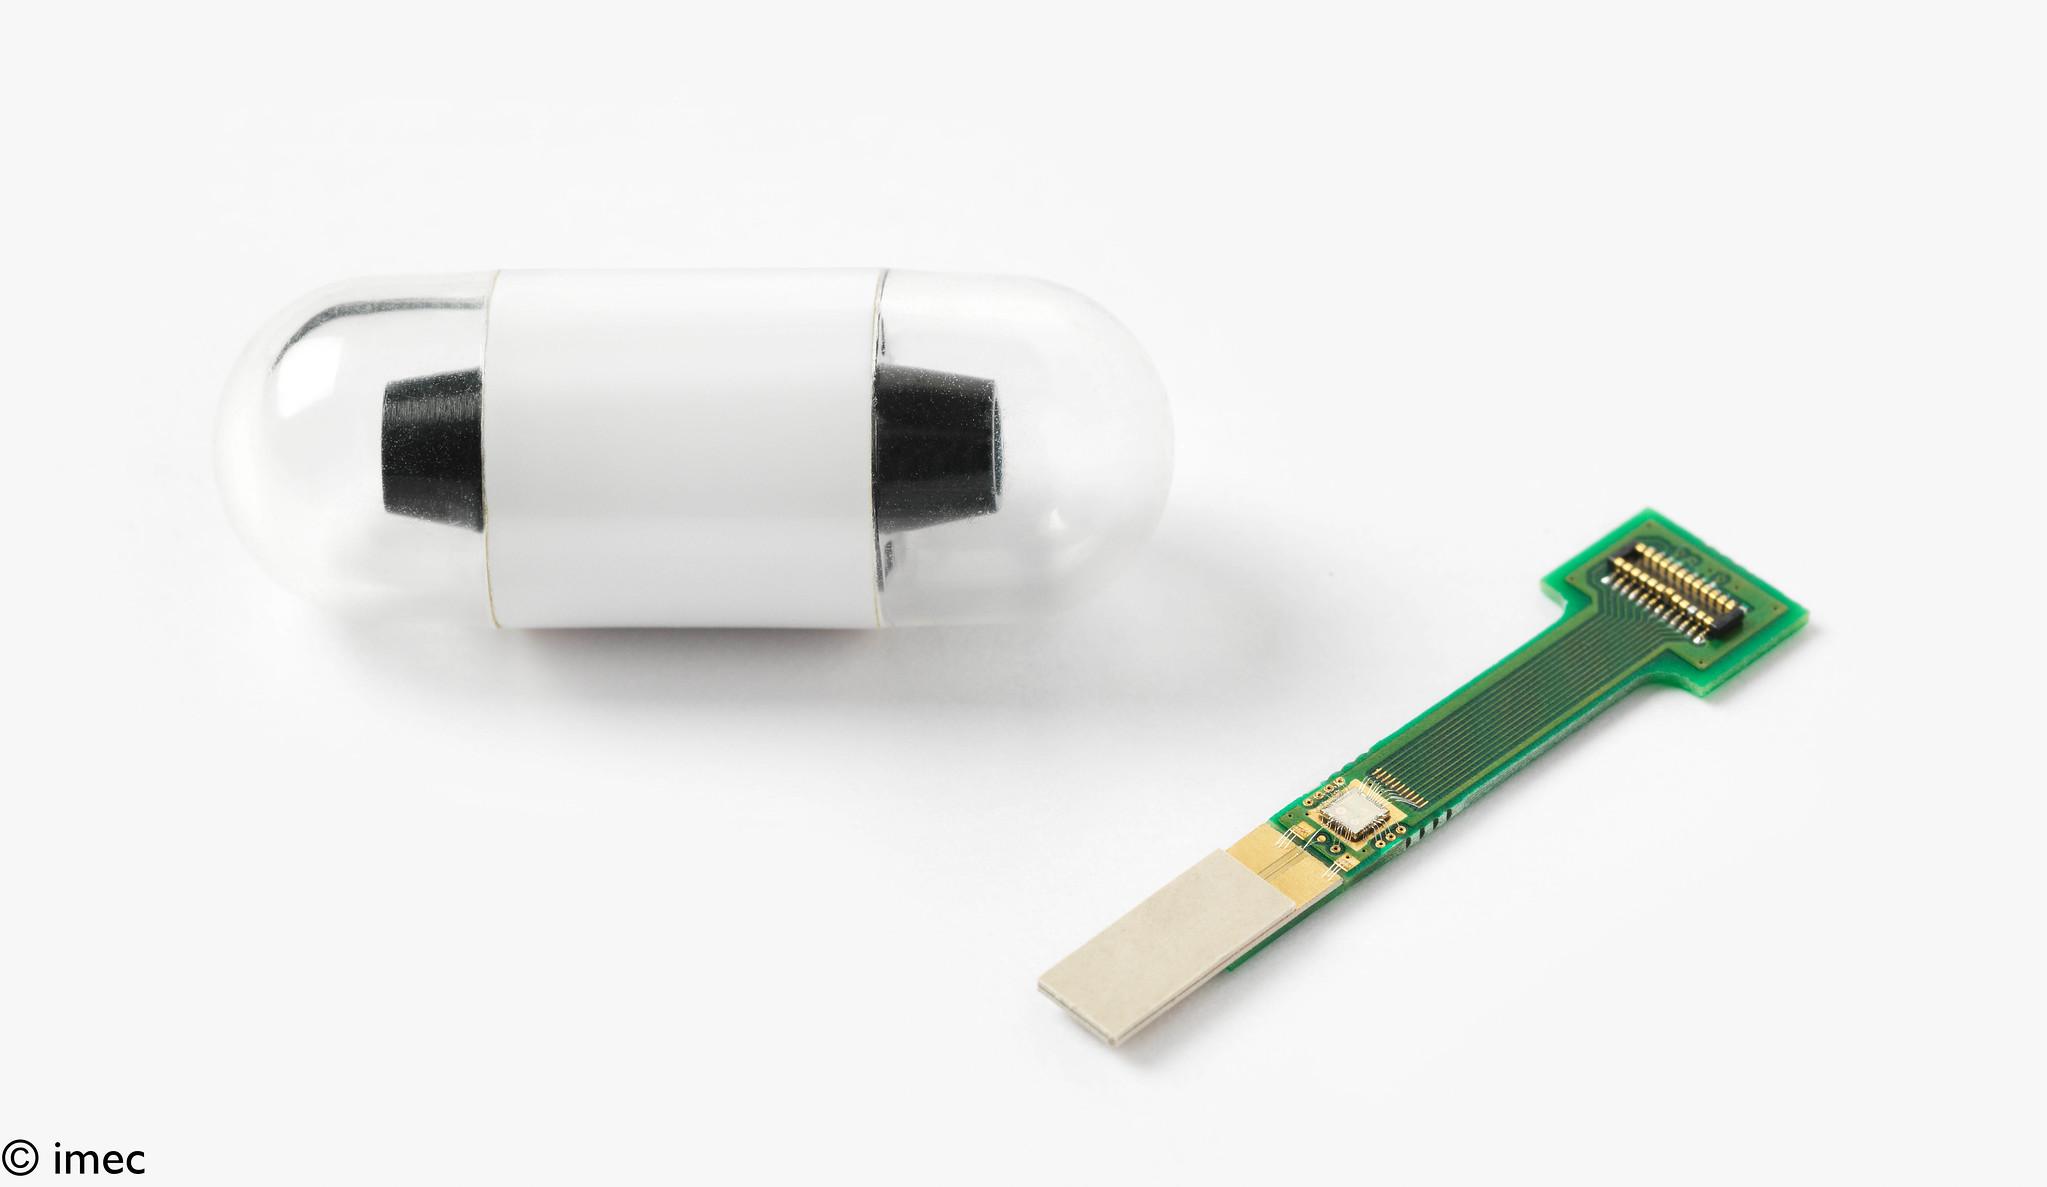 millimeter-scale wireless transceiver for electronic pills